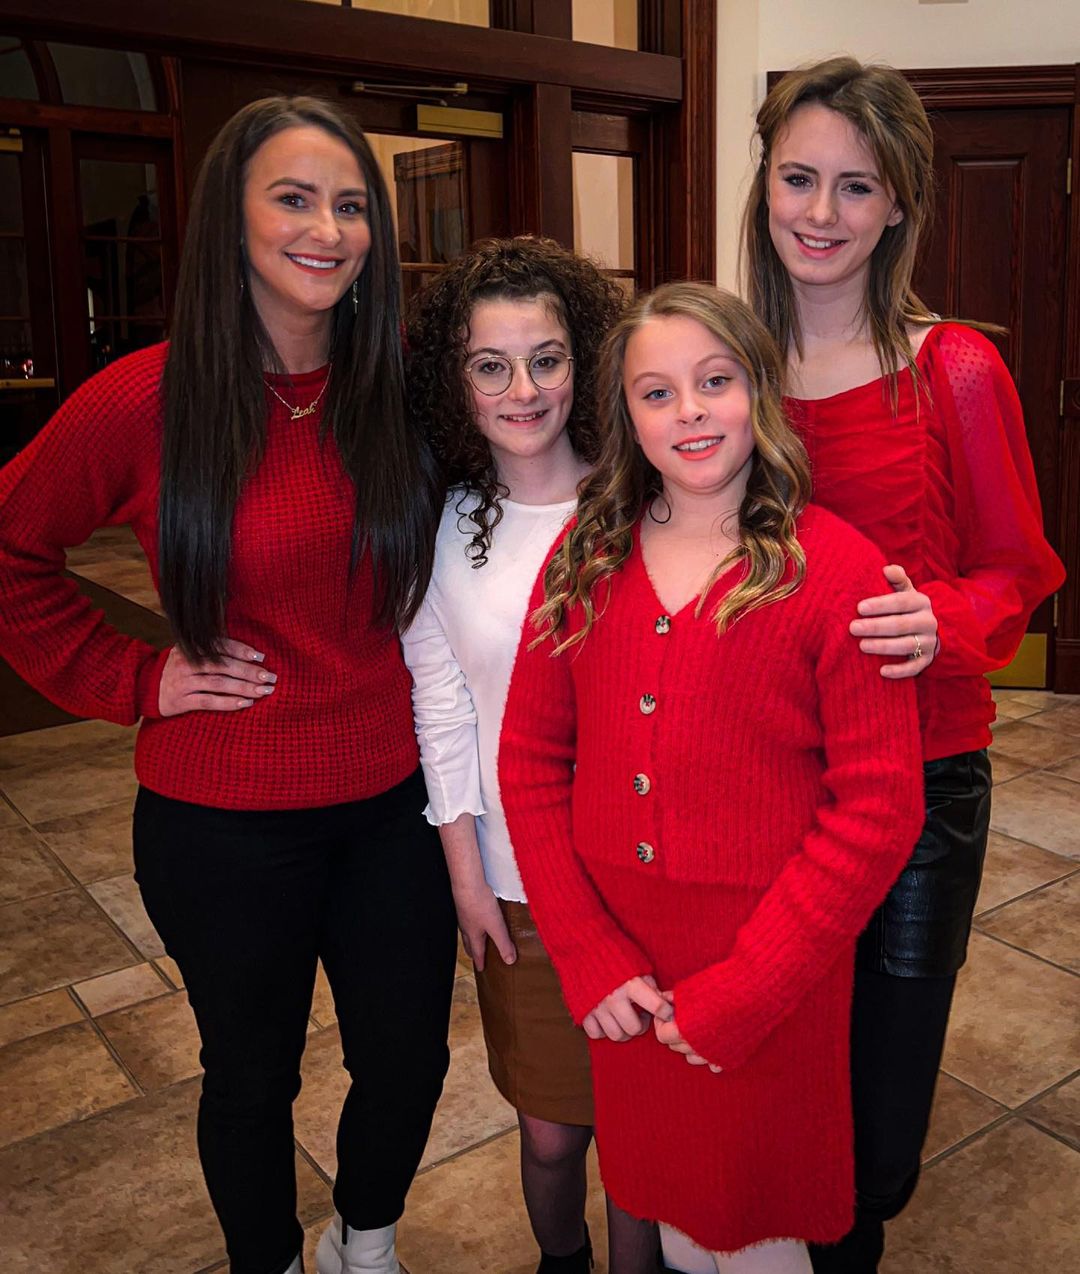 Leah Messer took a group photo with her three daughters